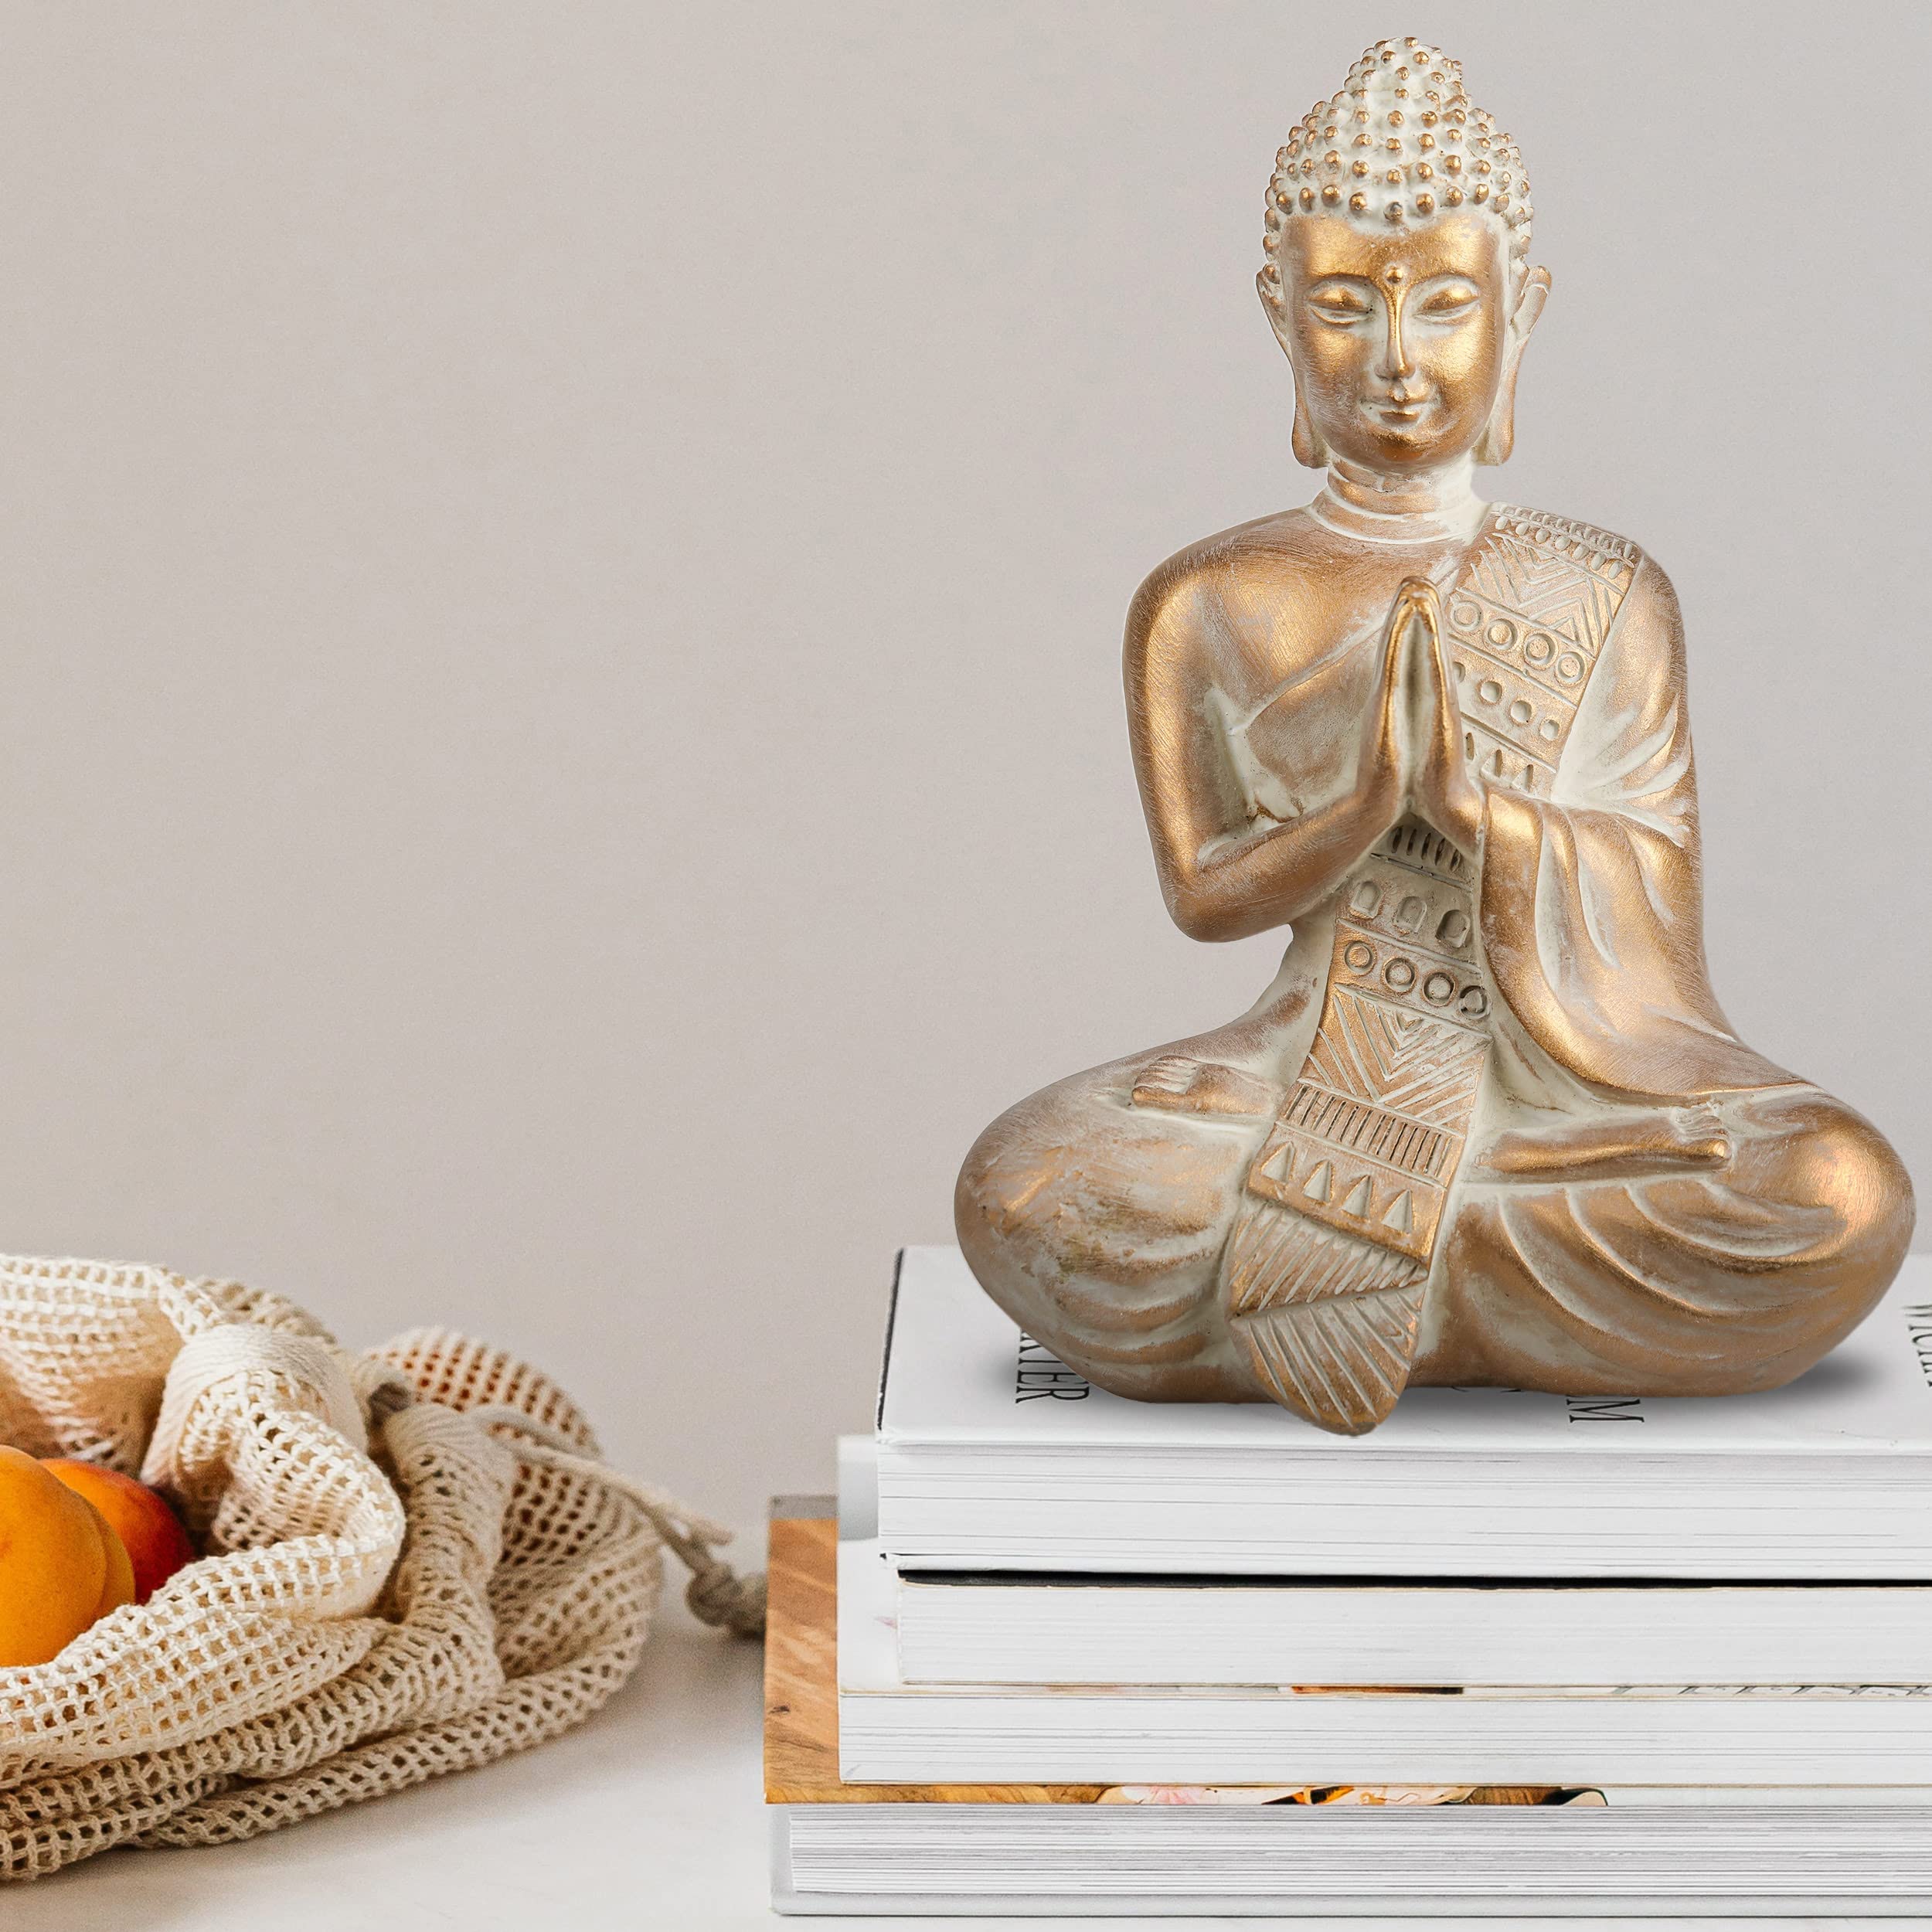 Decorate your home buddha decorations for the home with these